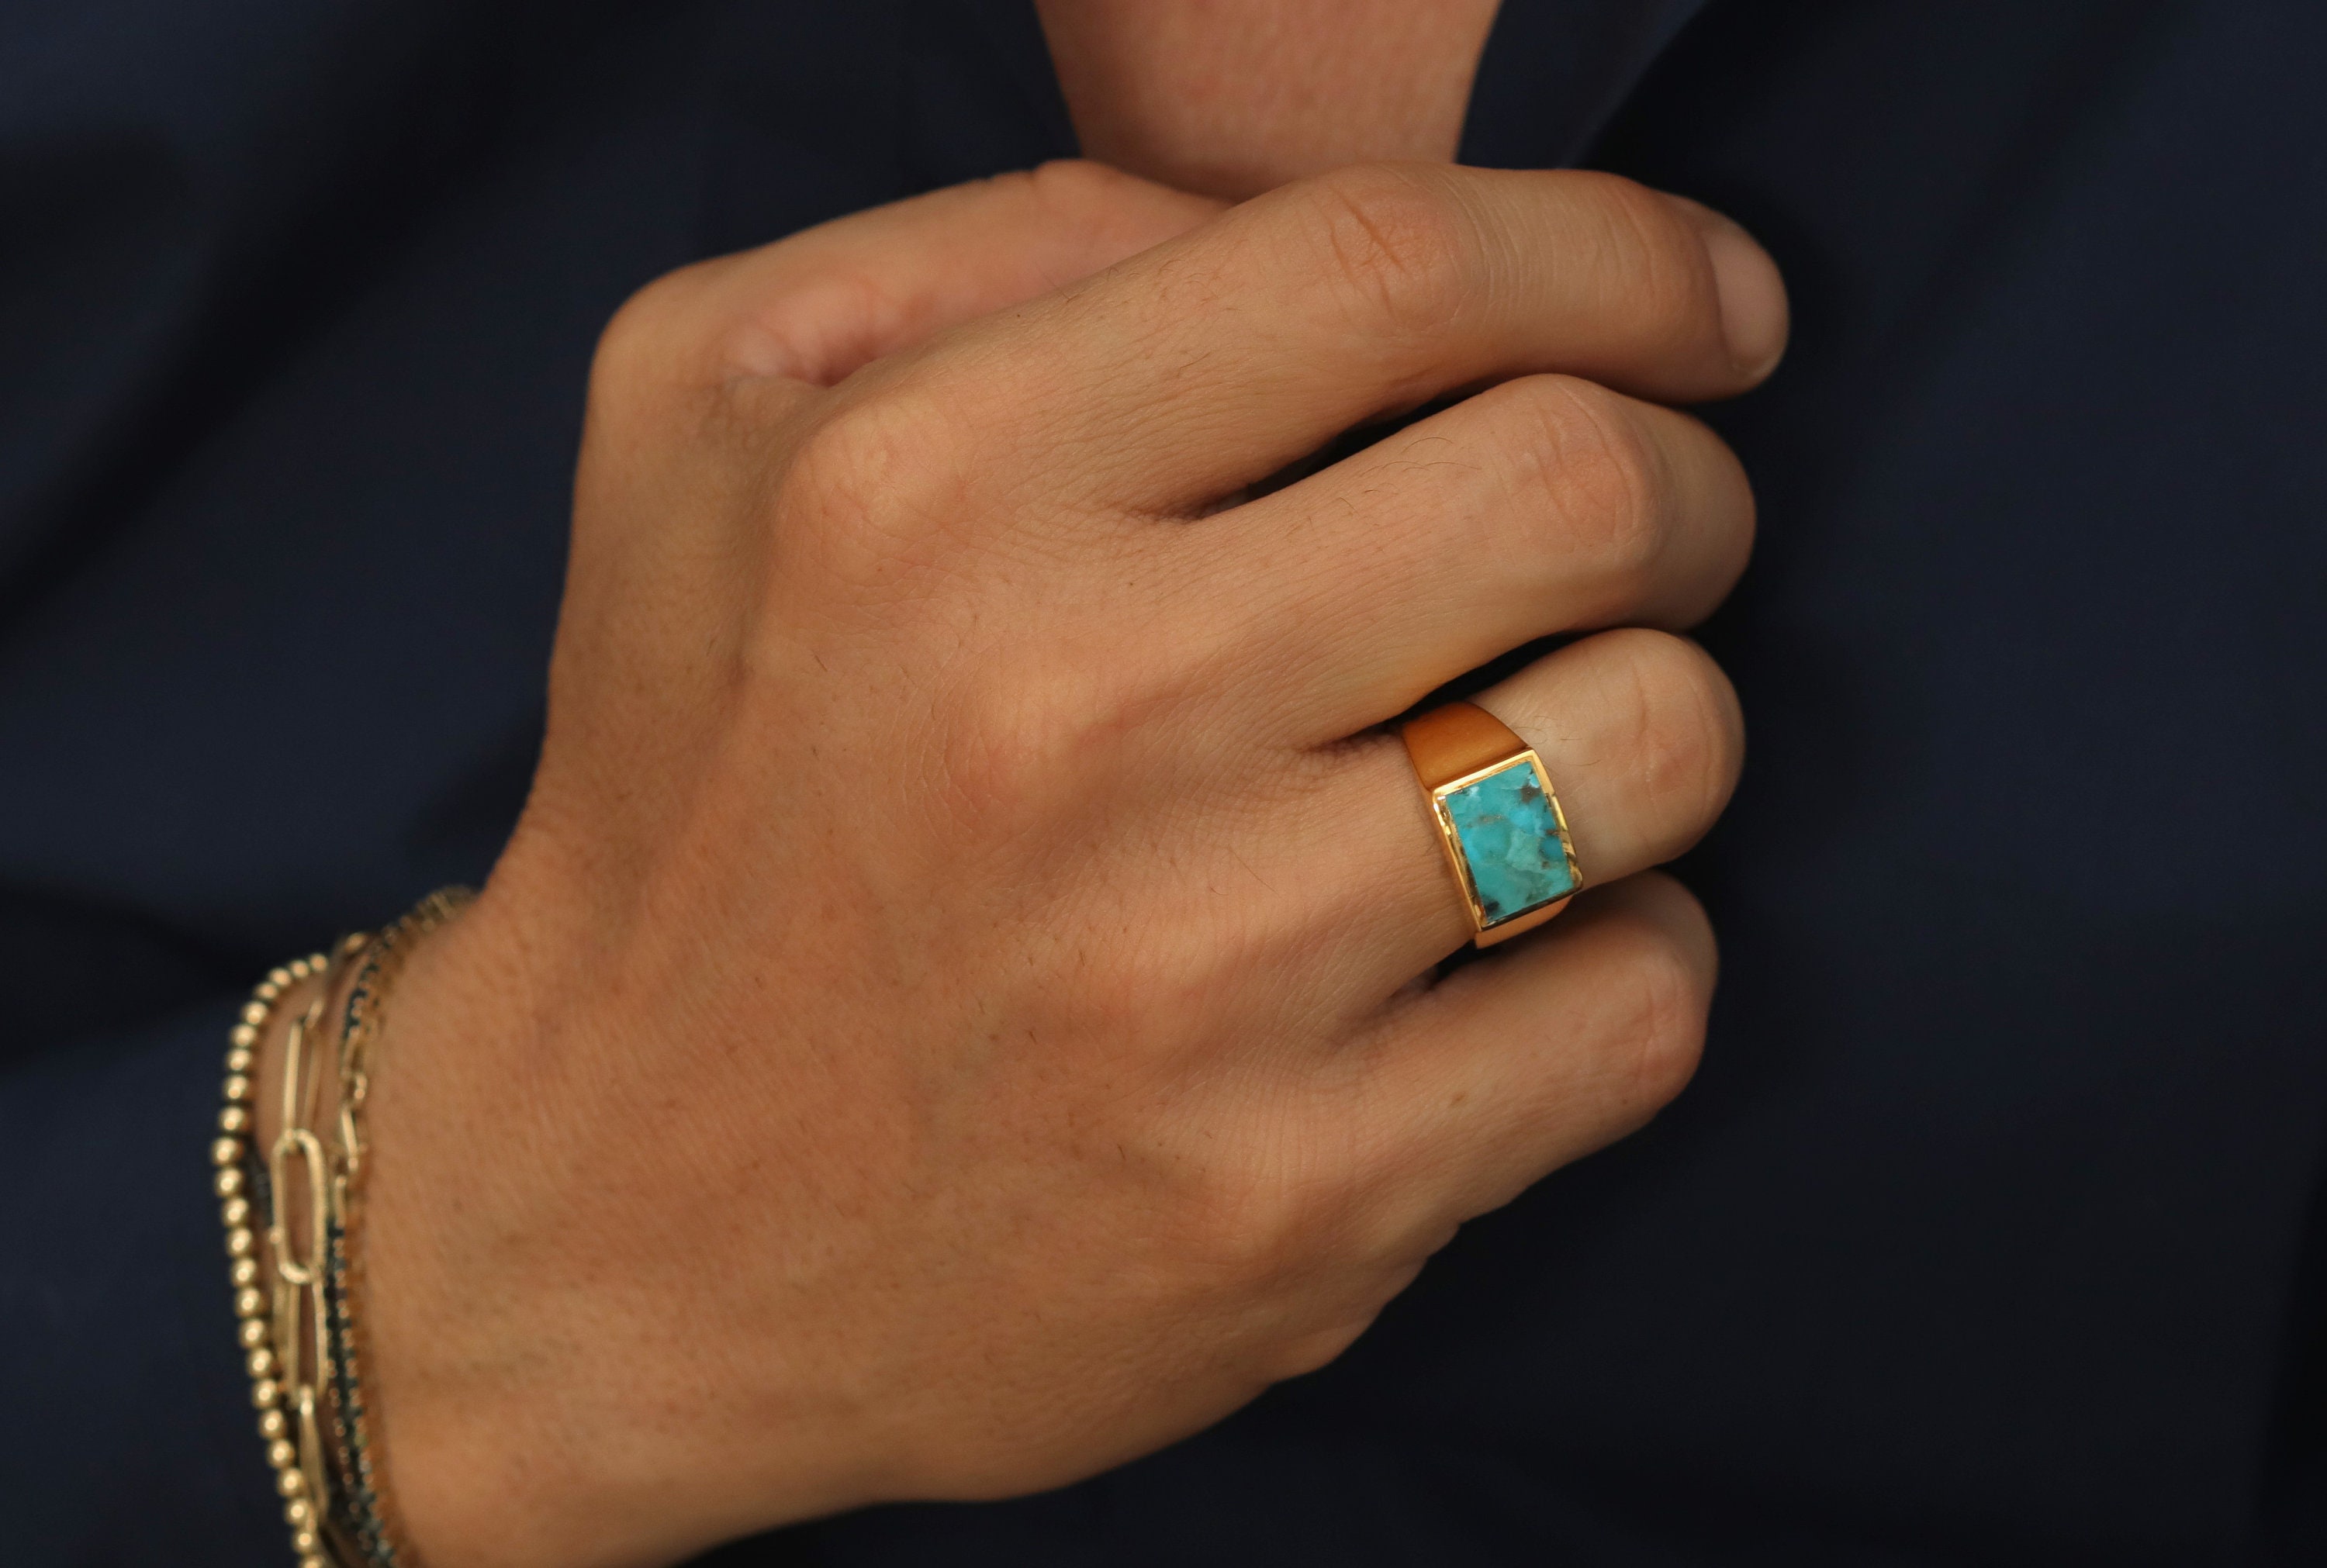 Sedona Solid Sterling Silver Turquoise Men's Ring: 'Sedona Canyon' Men's  Turquoise Ring